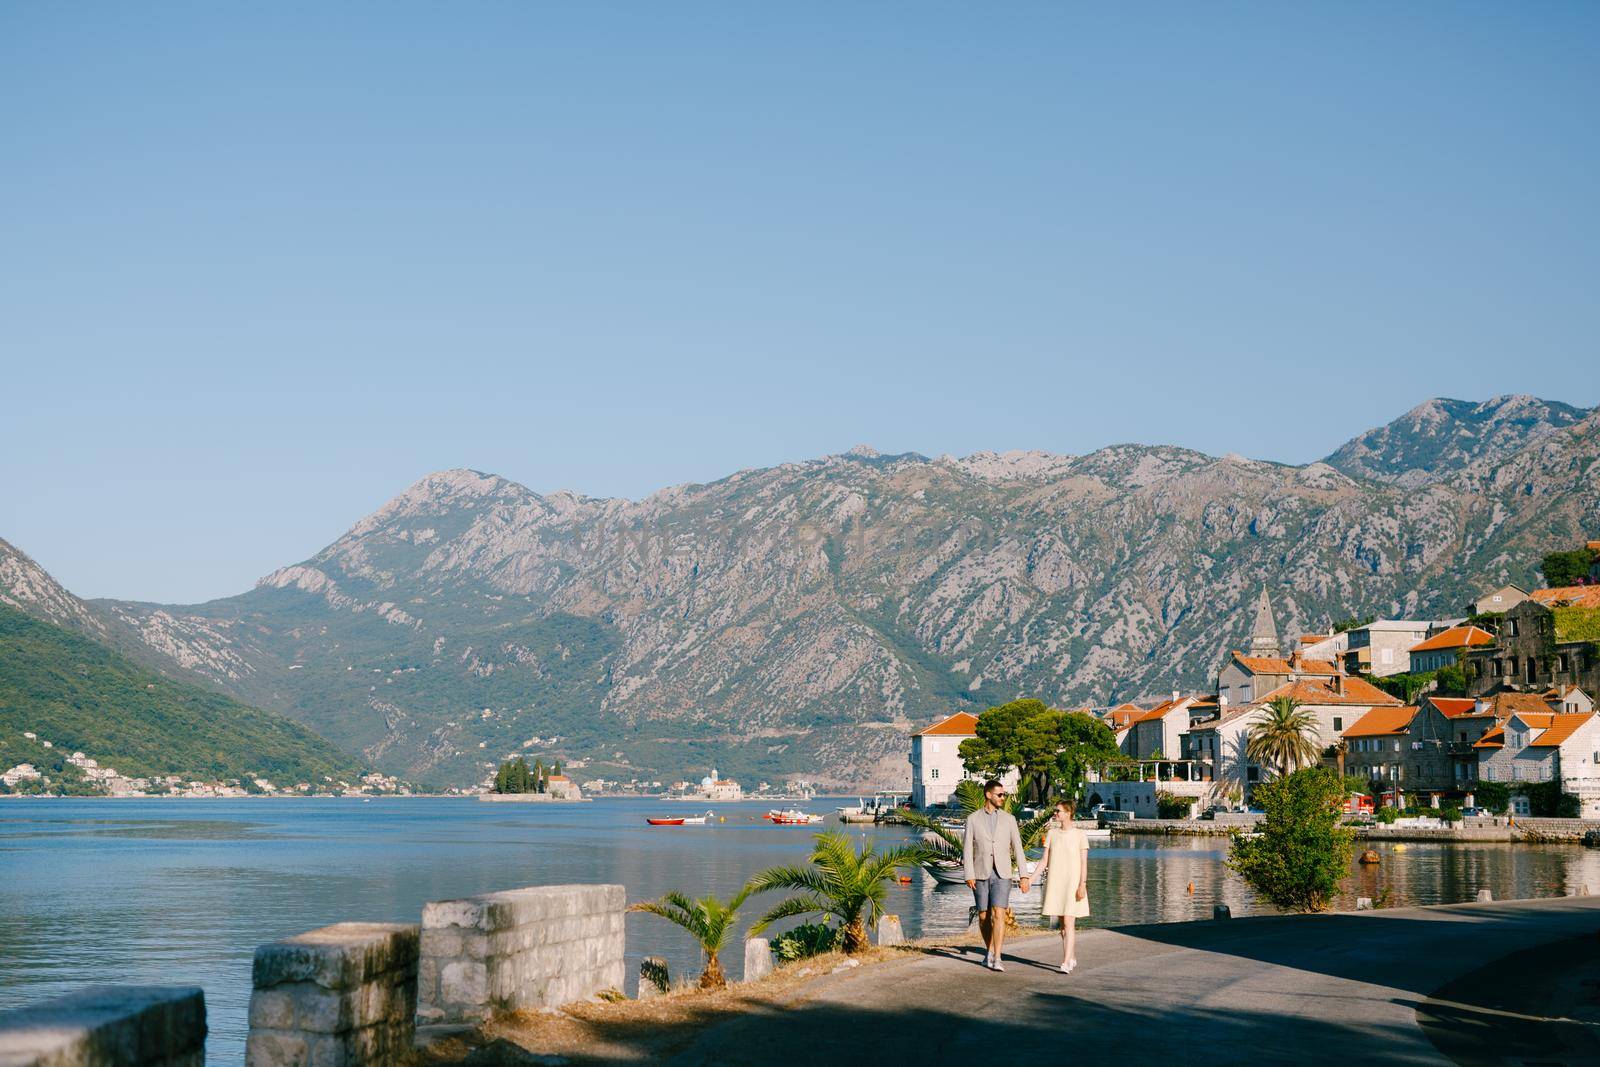 A loving couple walks holding hands along the embankment of the old town of Perast by Nadtochiy